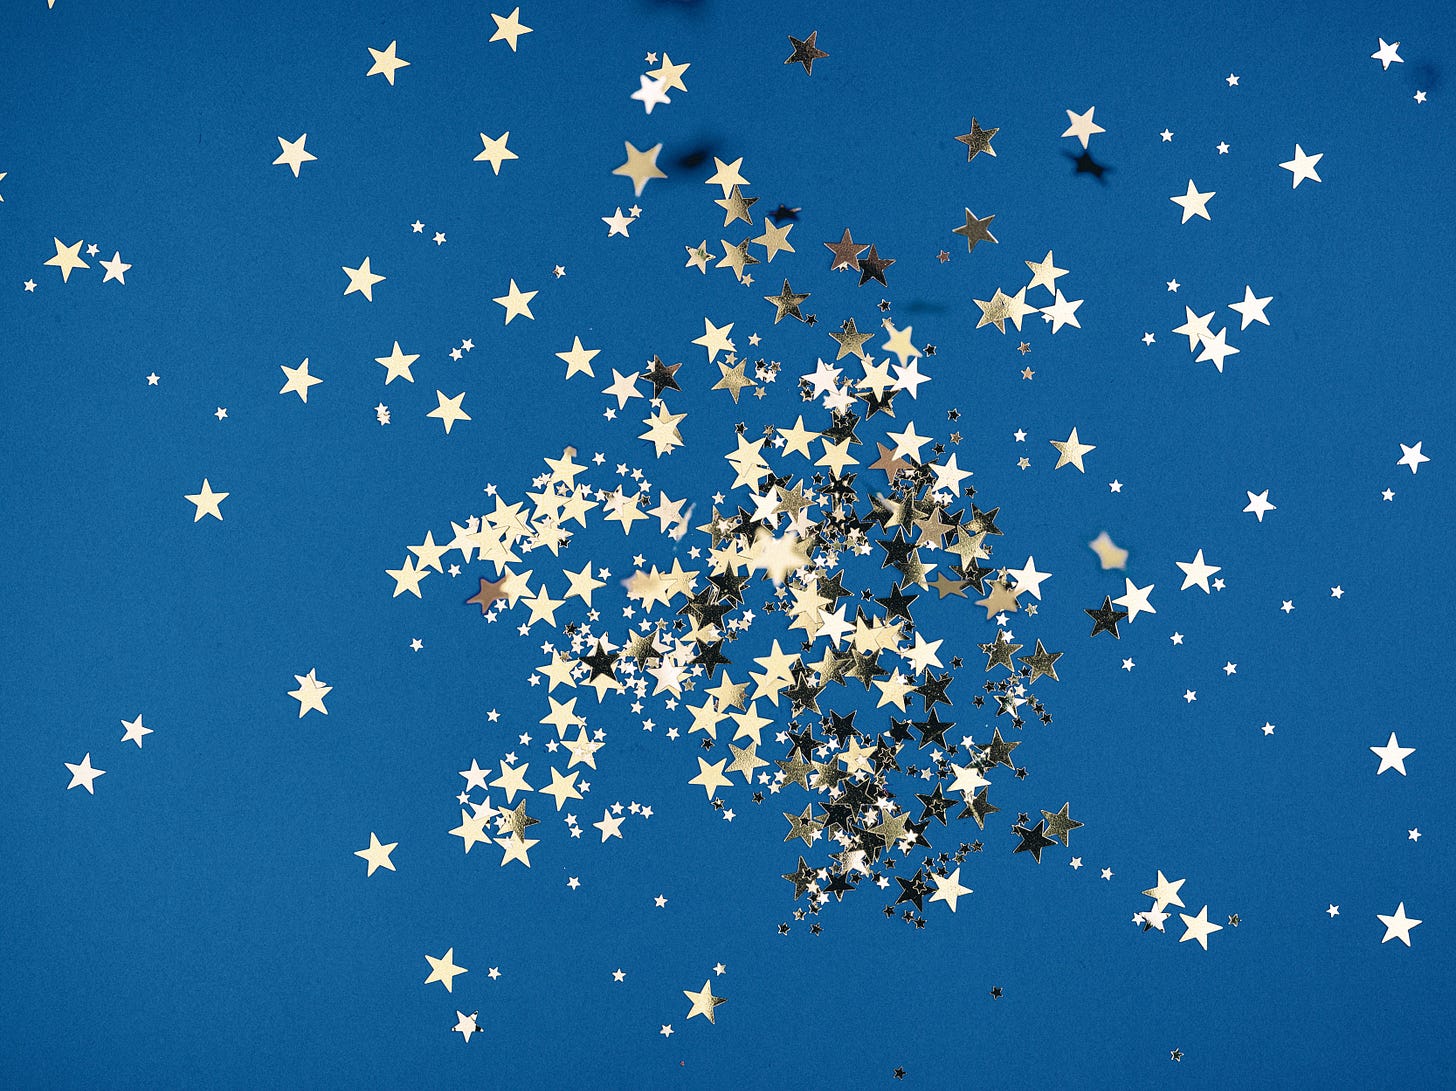 A cluster of small, shiny, gold-colored, star-shaped confetti is sprawled across a blue background